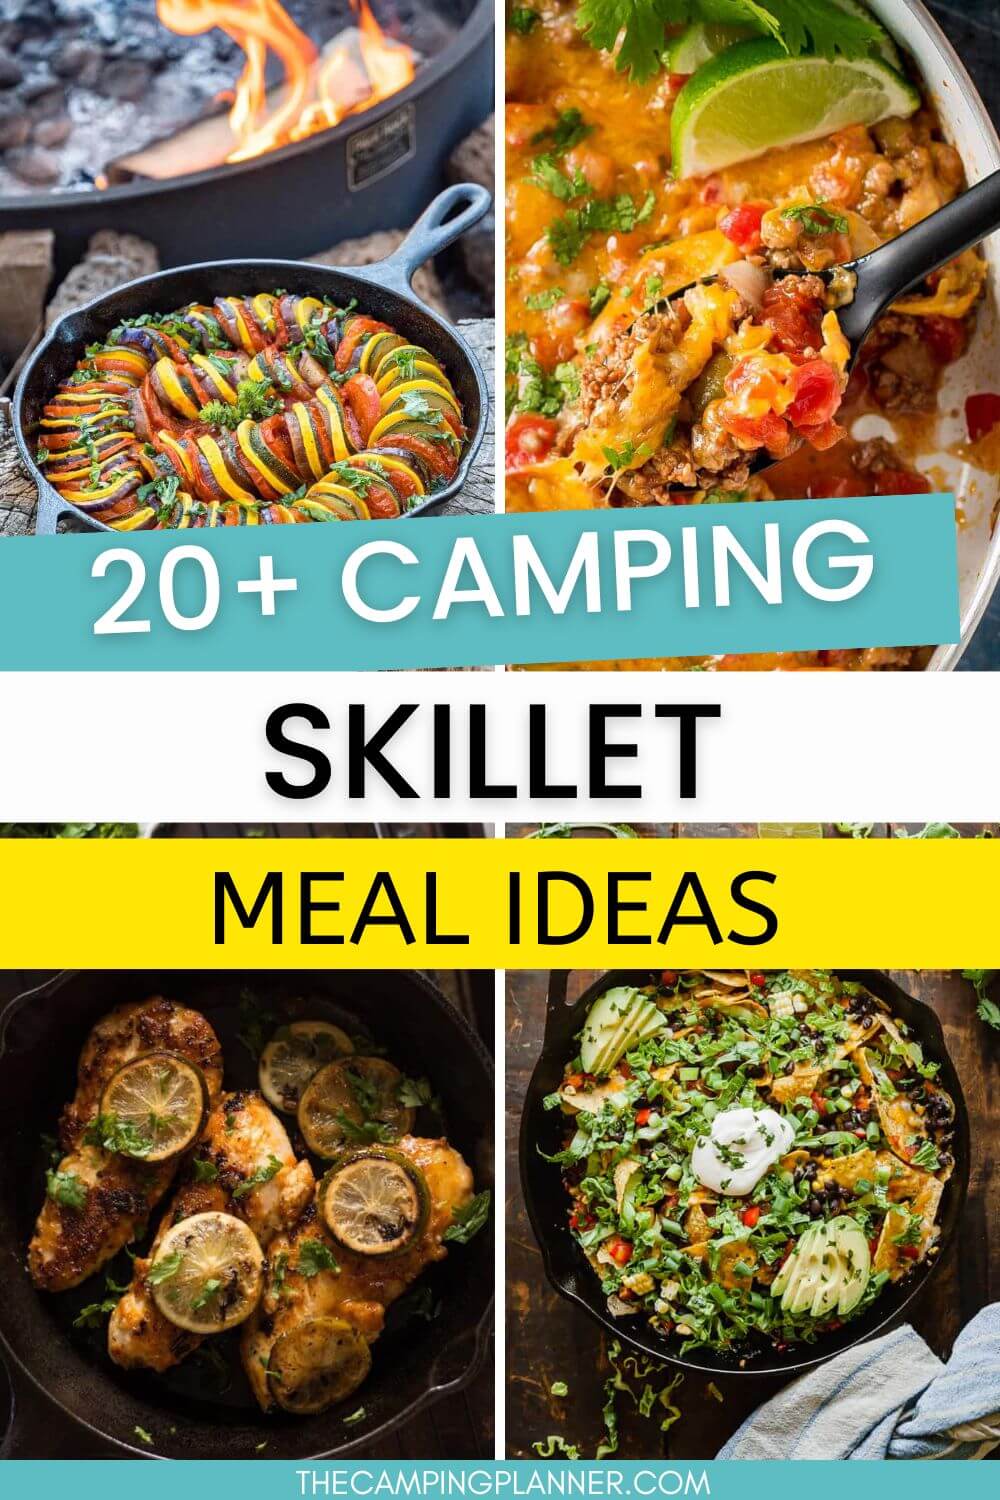 20+ camping skillet meal ideas pinterest image.